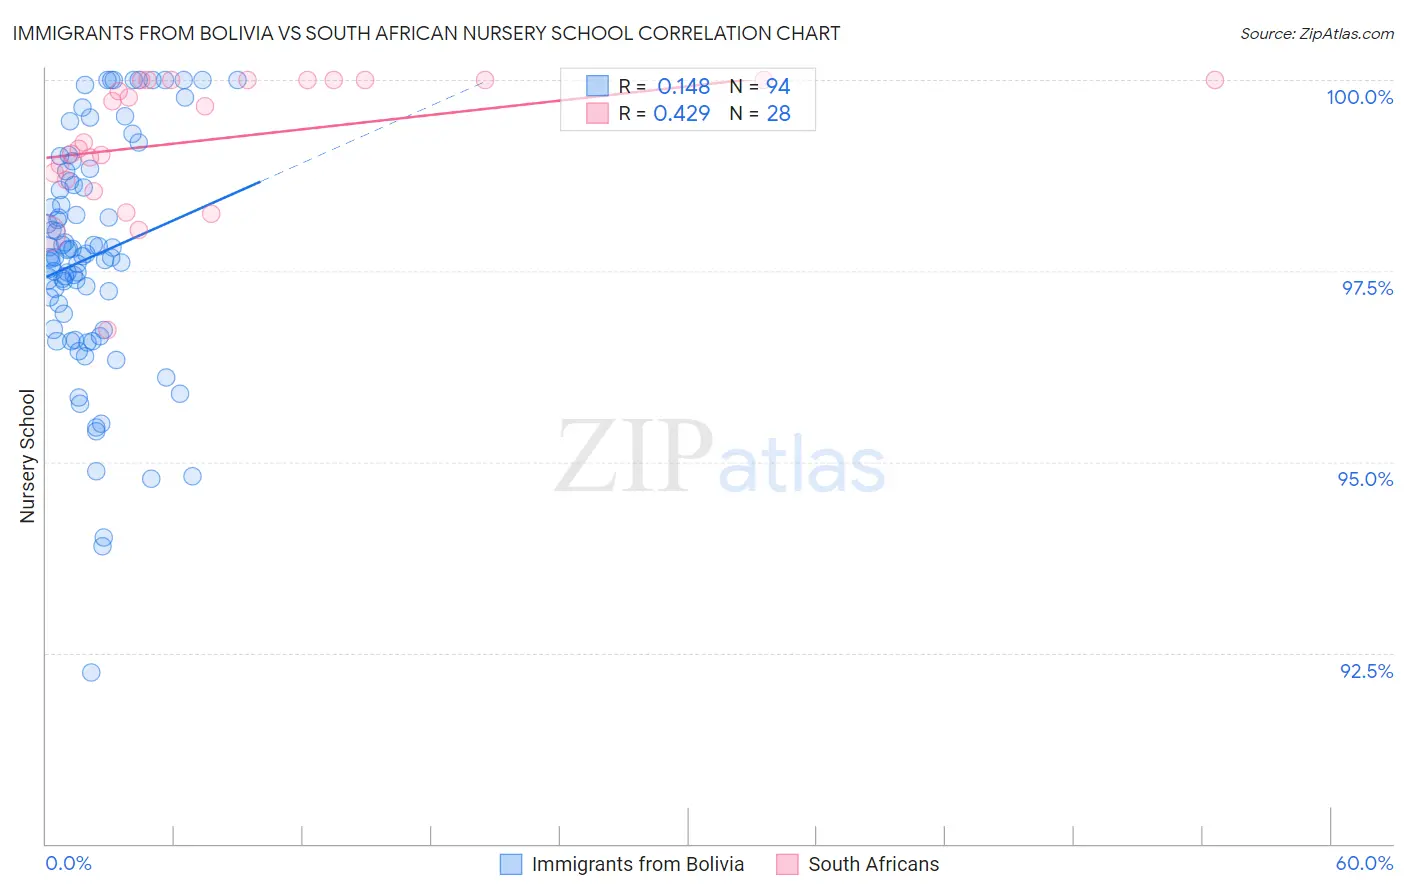 Immigrants from Bolivia vs South African Nursery School